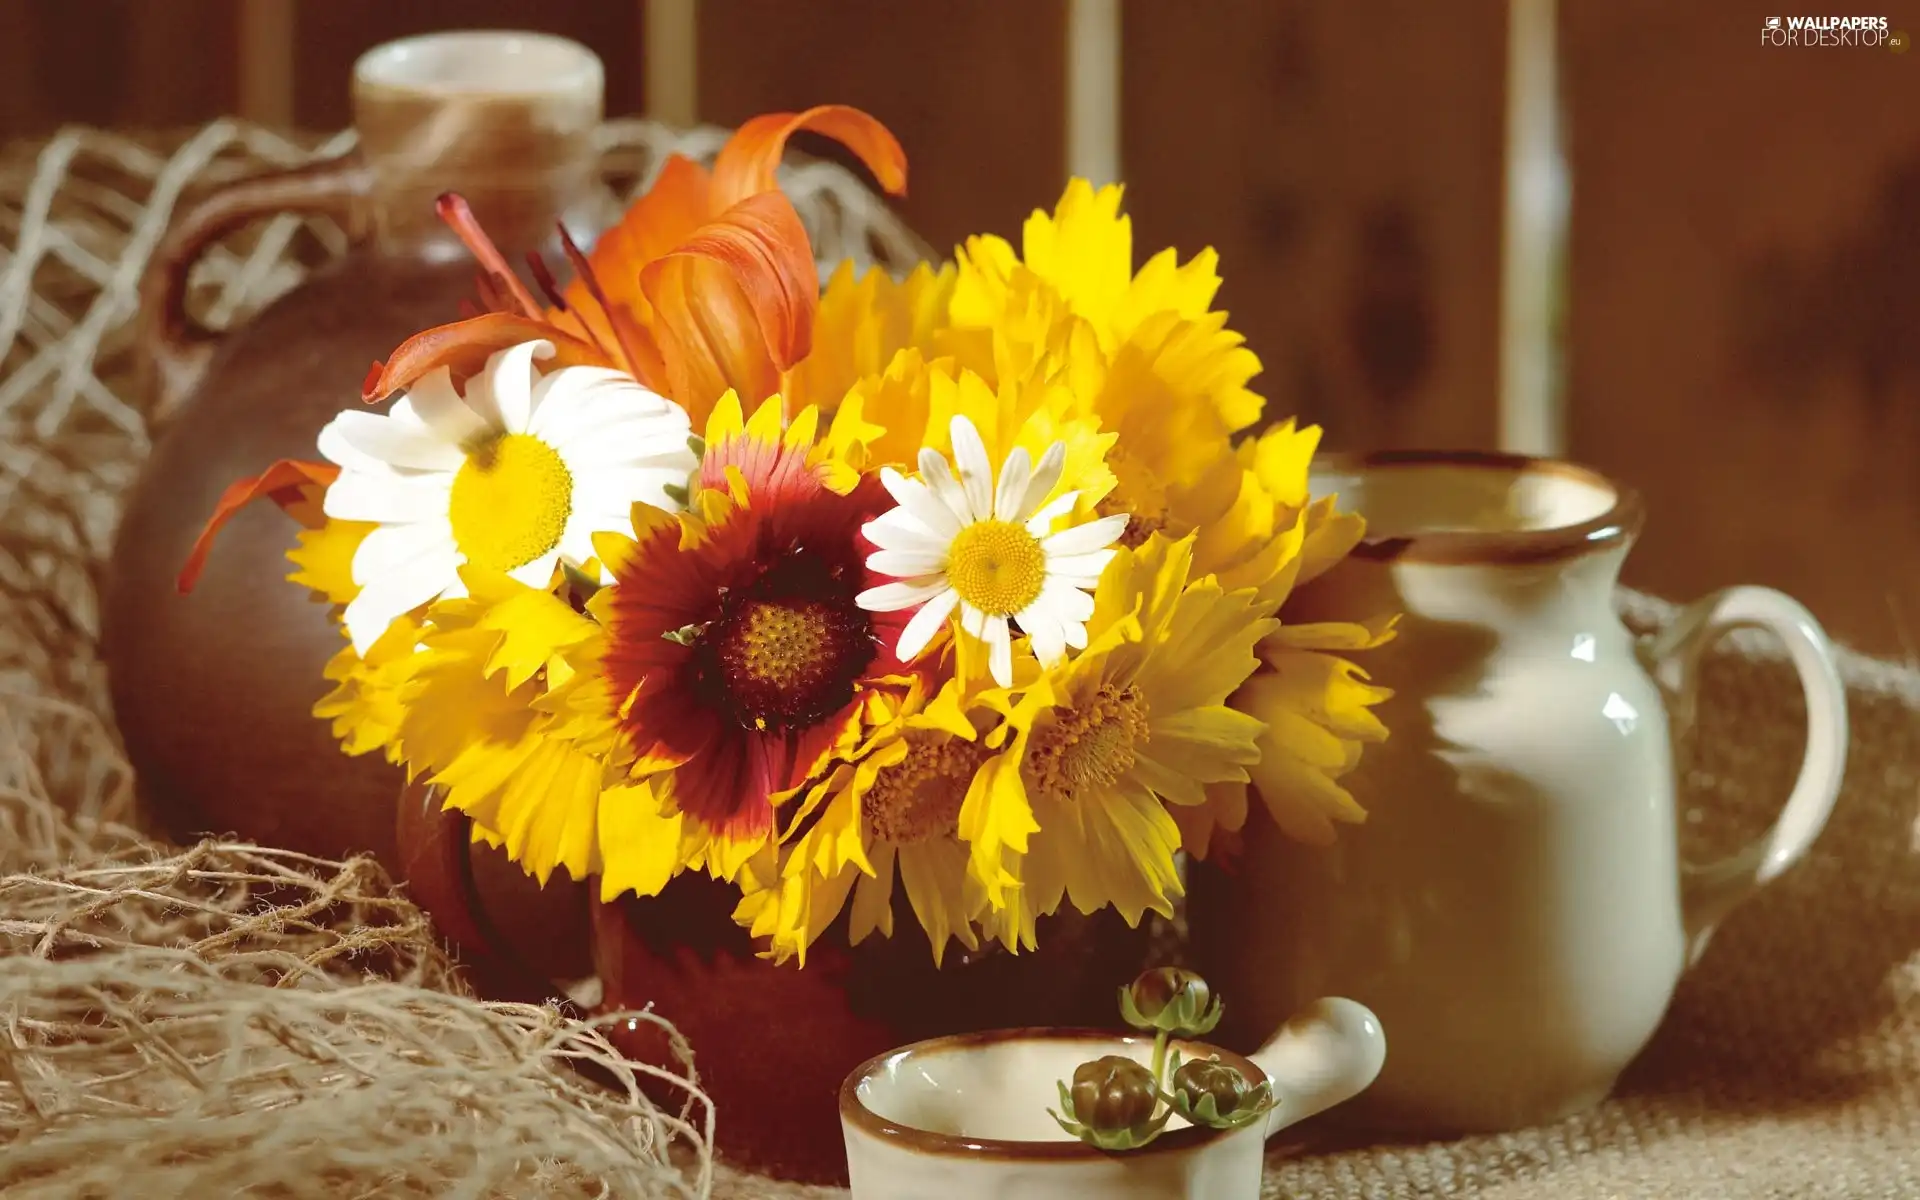 clay, Yellow, Flowers, dishes